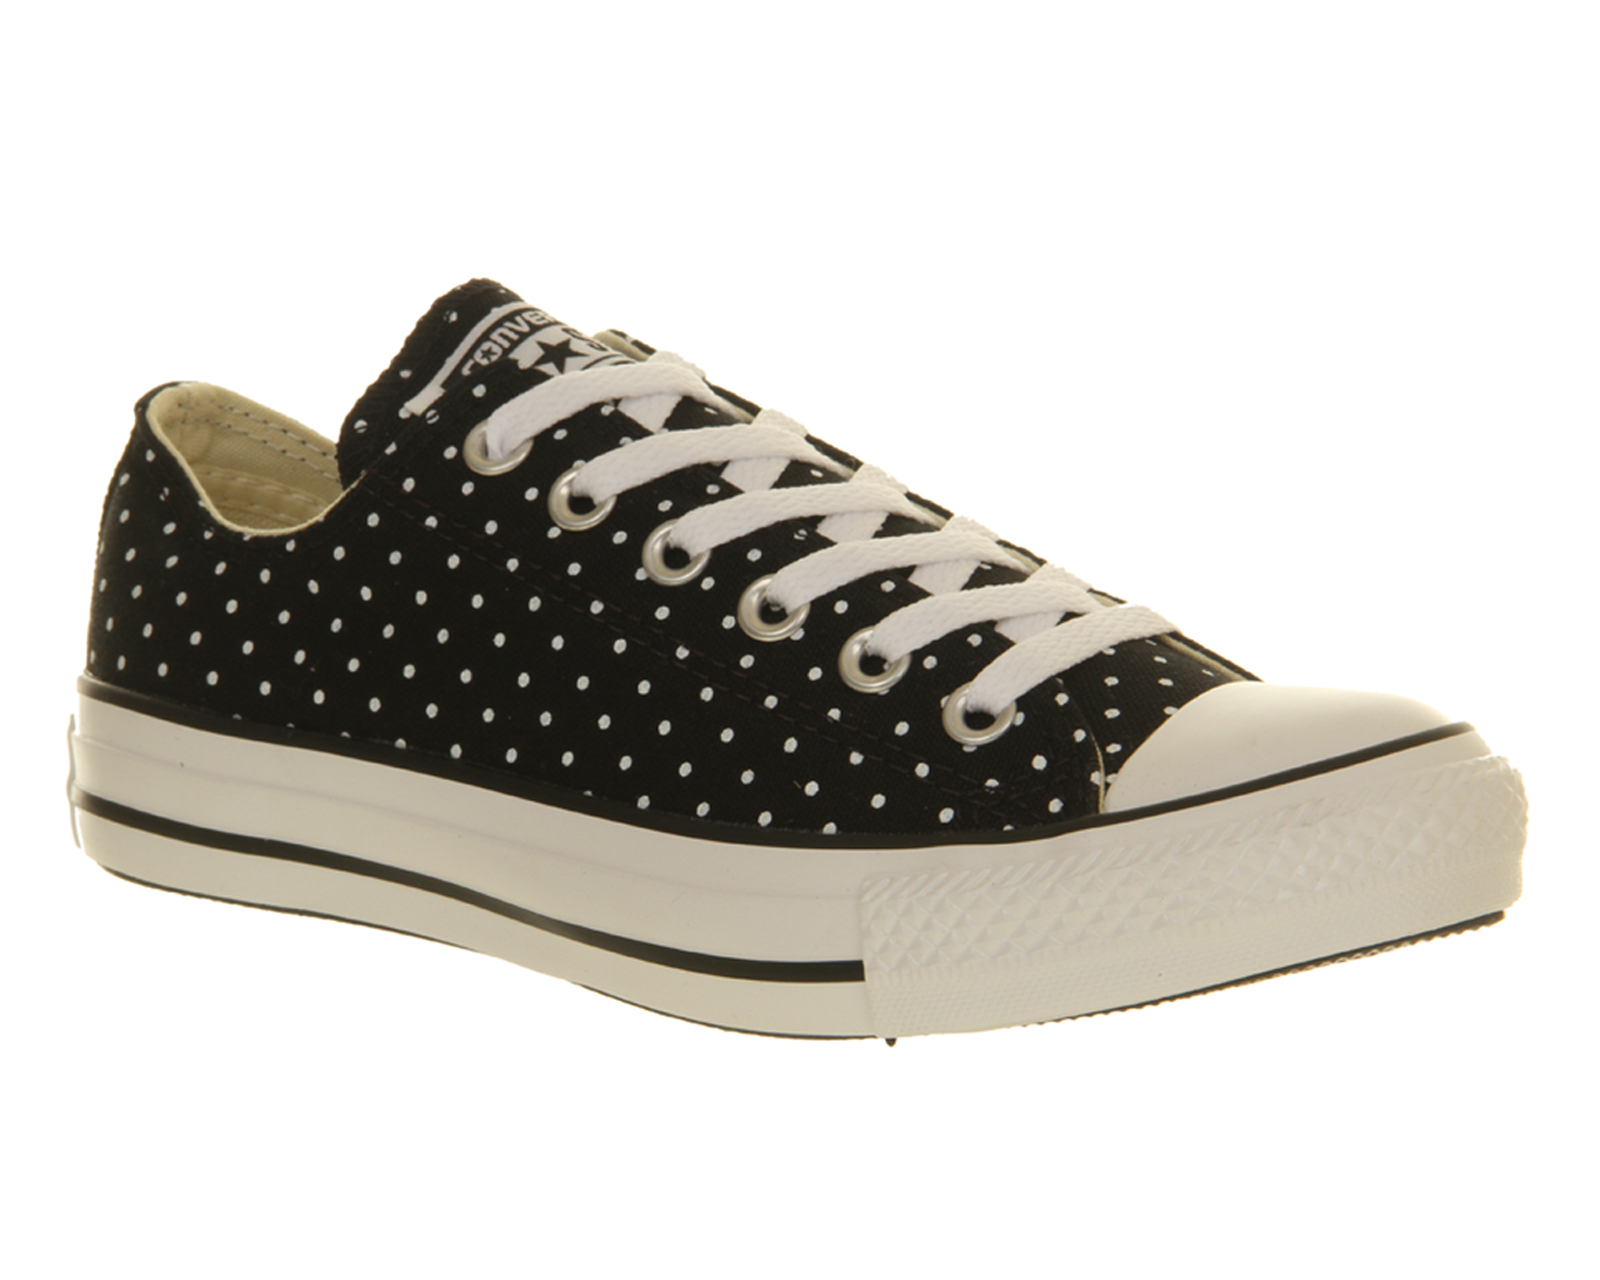 spotty converse trainers